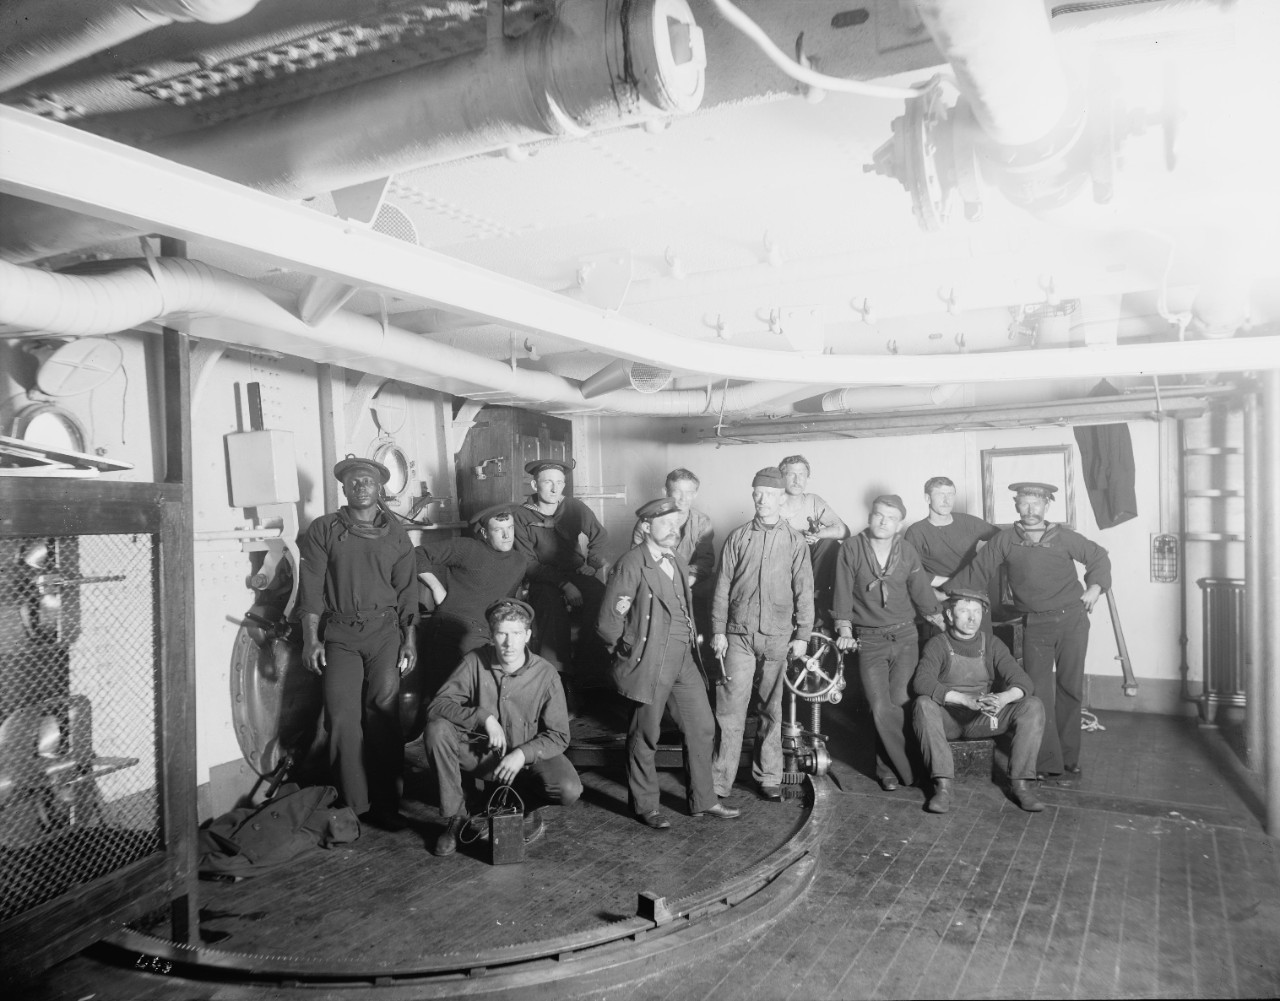 LC-DIG-DET-4a14370:   USS Maine (1895-98)  Gunner’s gang, Photographed by Edward Hart, Detroit Publishing Company, 1896.  (6/12/2015).